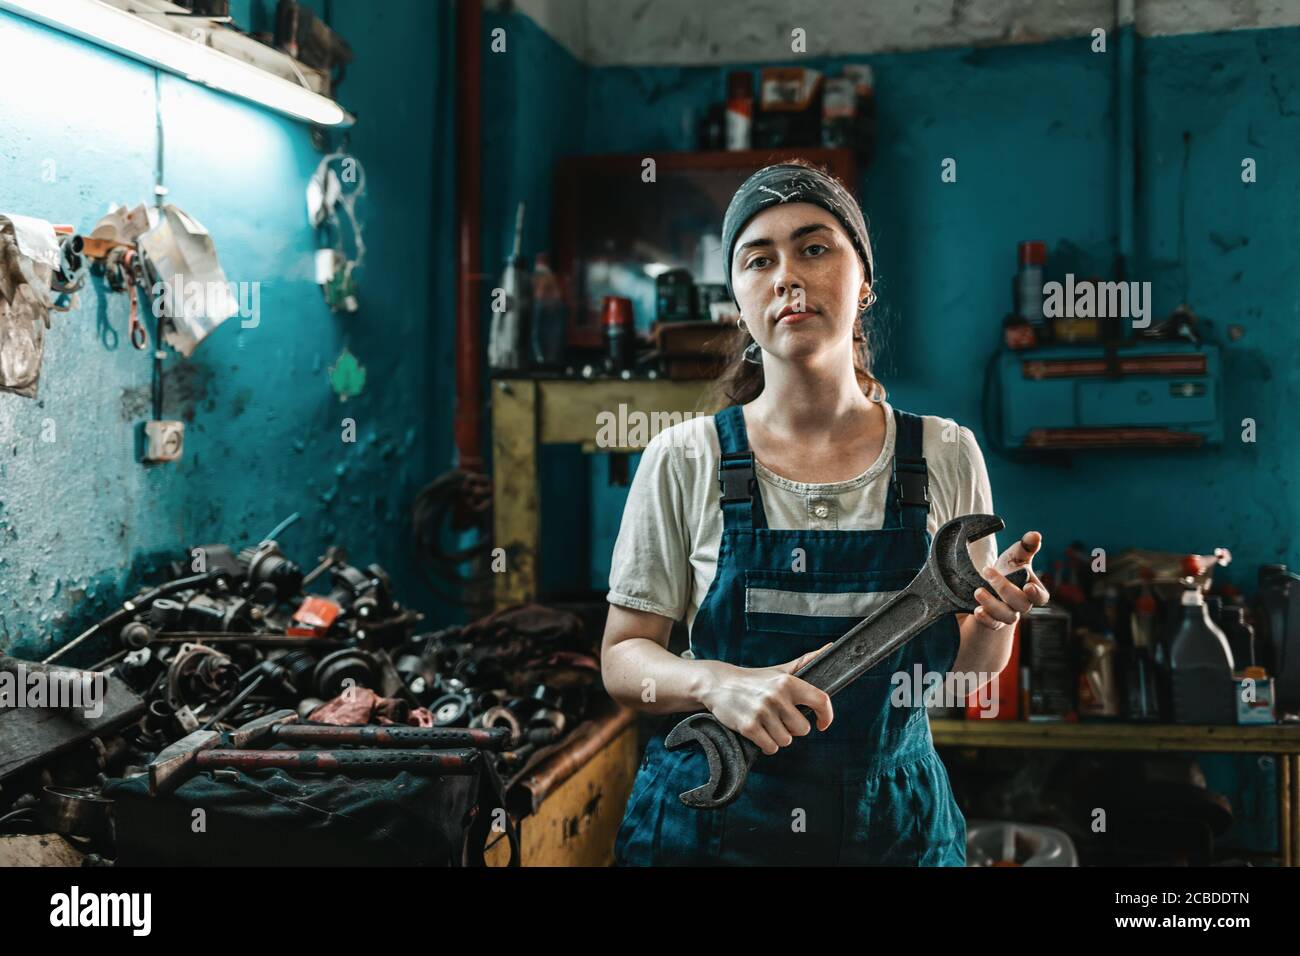 The concept of small business, feminism and women's equality. A young woman in overalls poses with a large wrench in her hands. Stock Photo